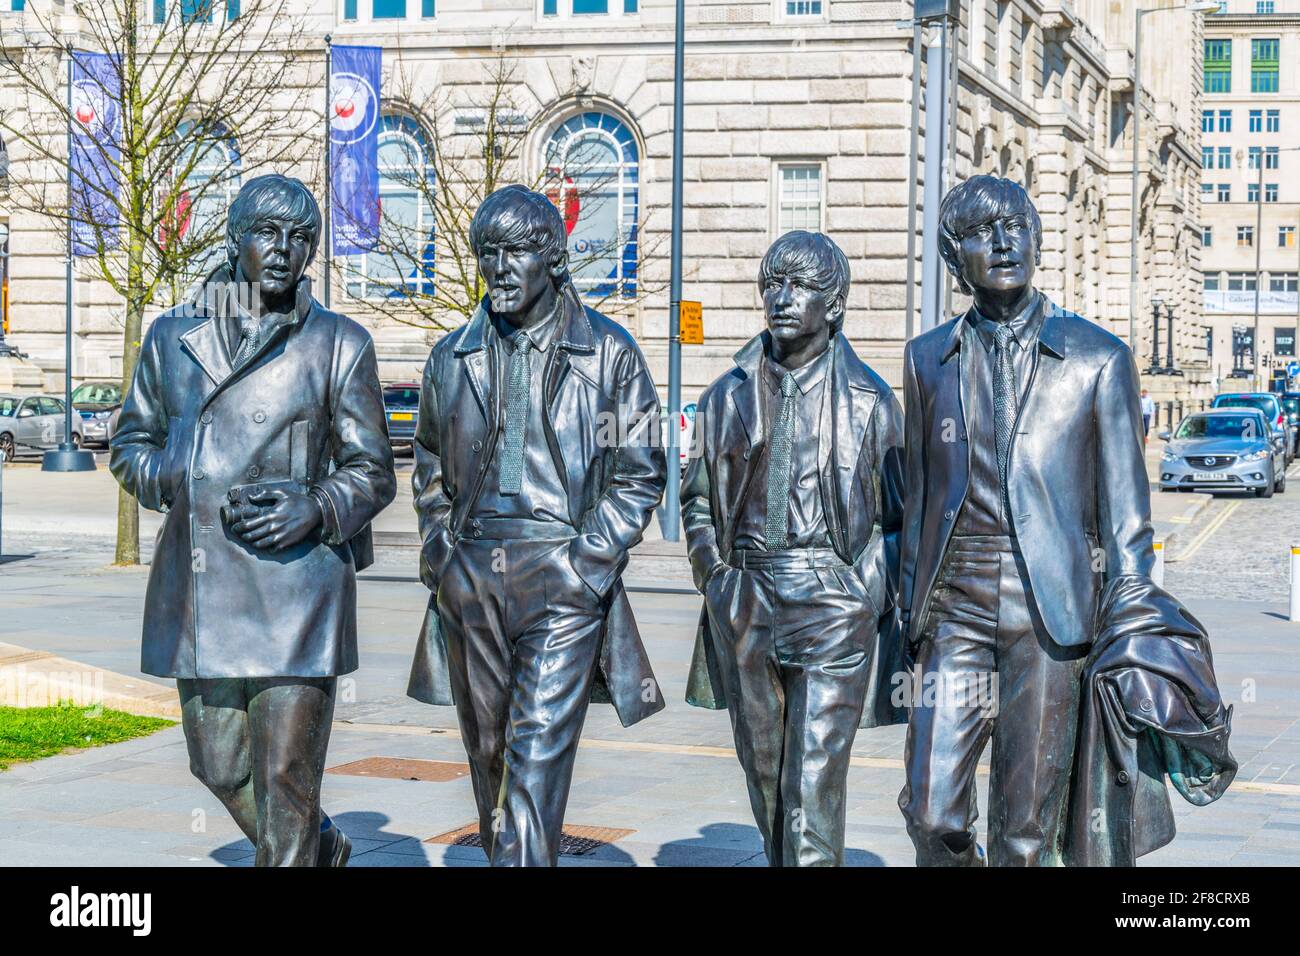 Statue of the Beatles in front of the royal liver building in Liverpool, England Stock Photo